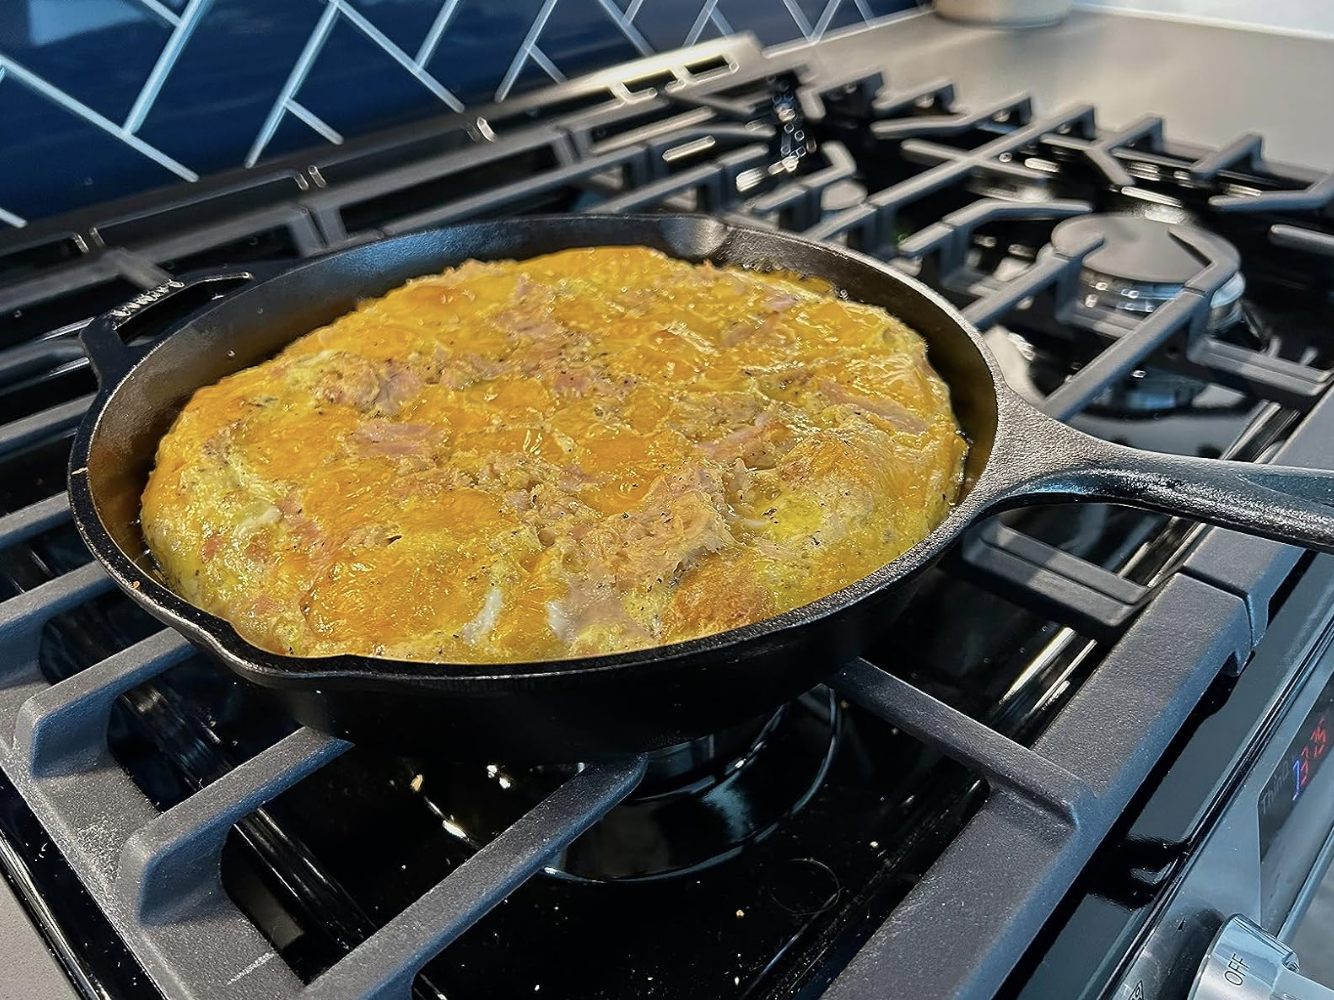 skillet on stove with meal in it